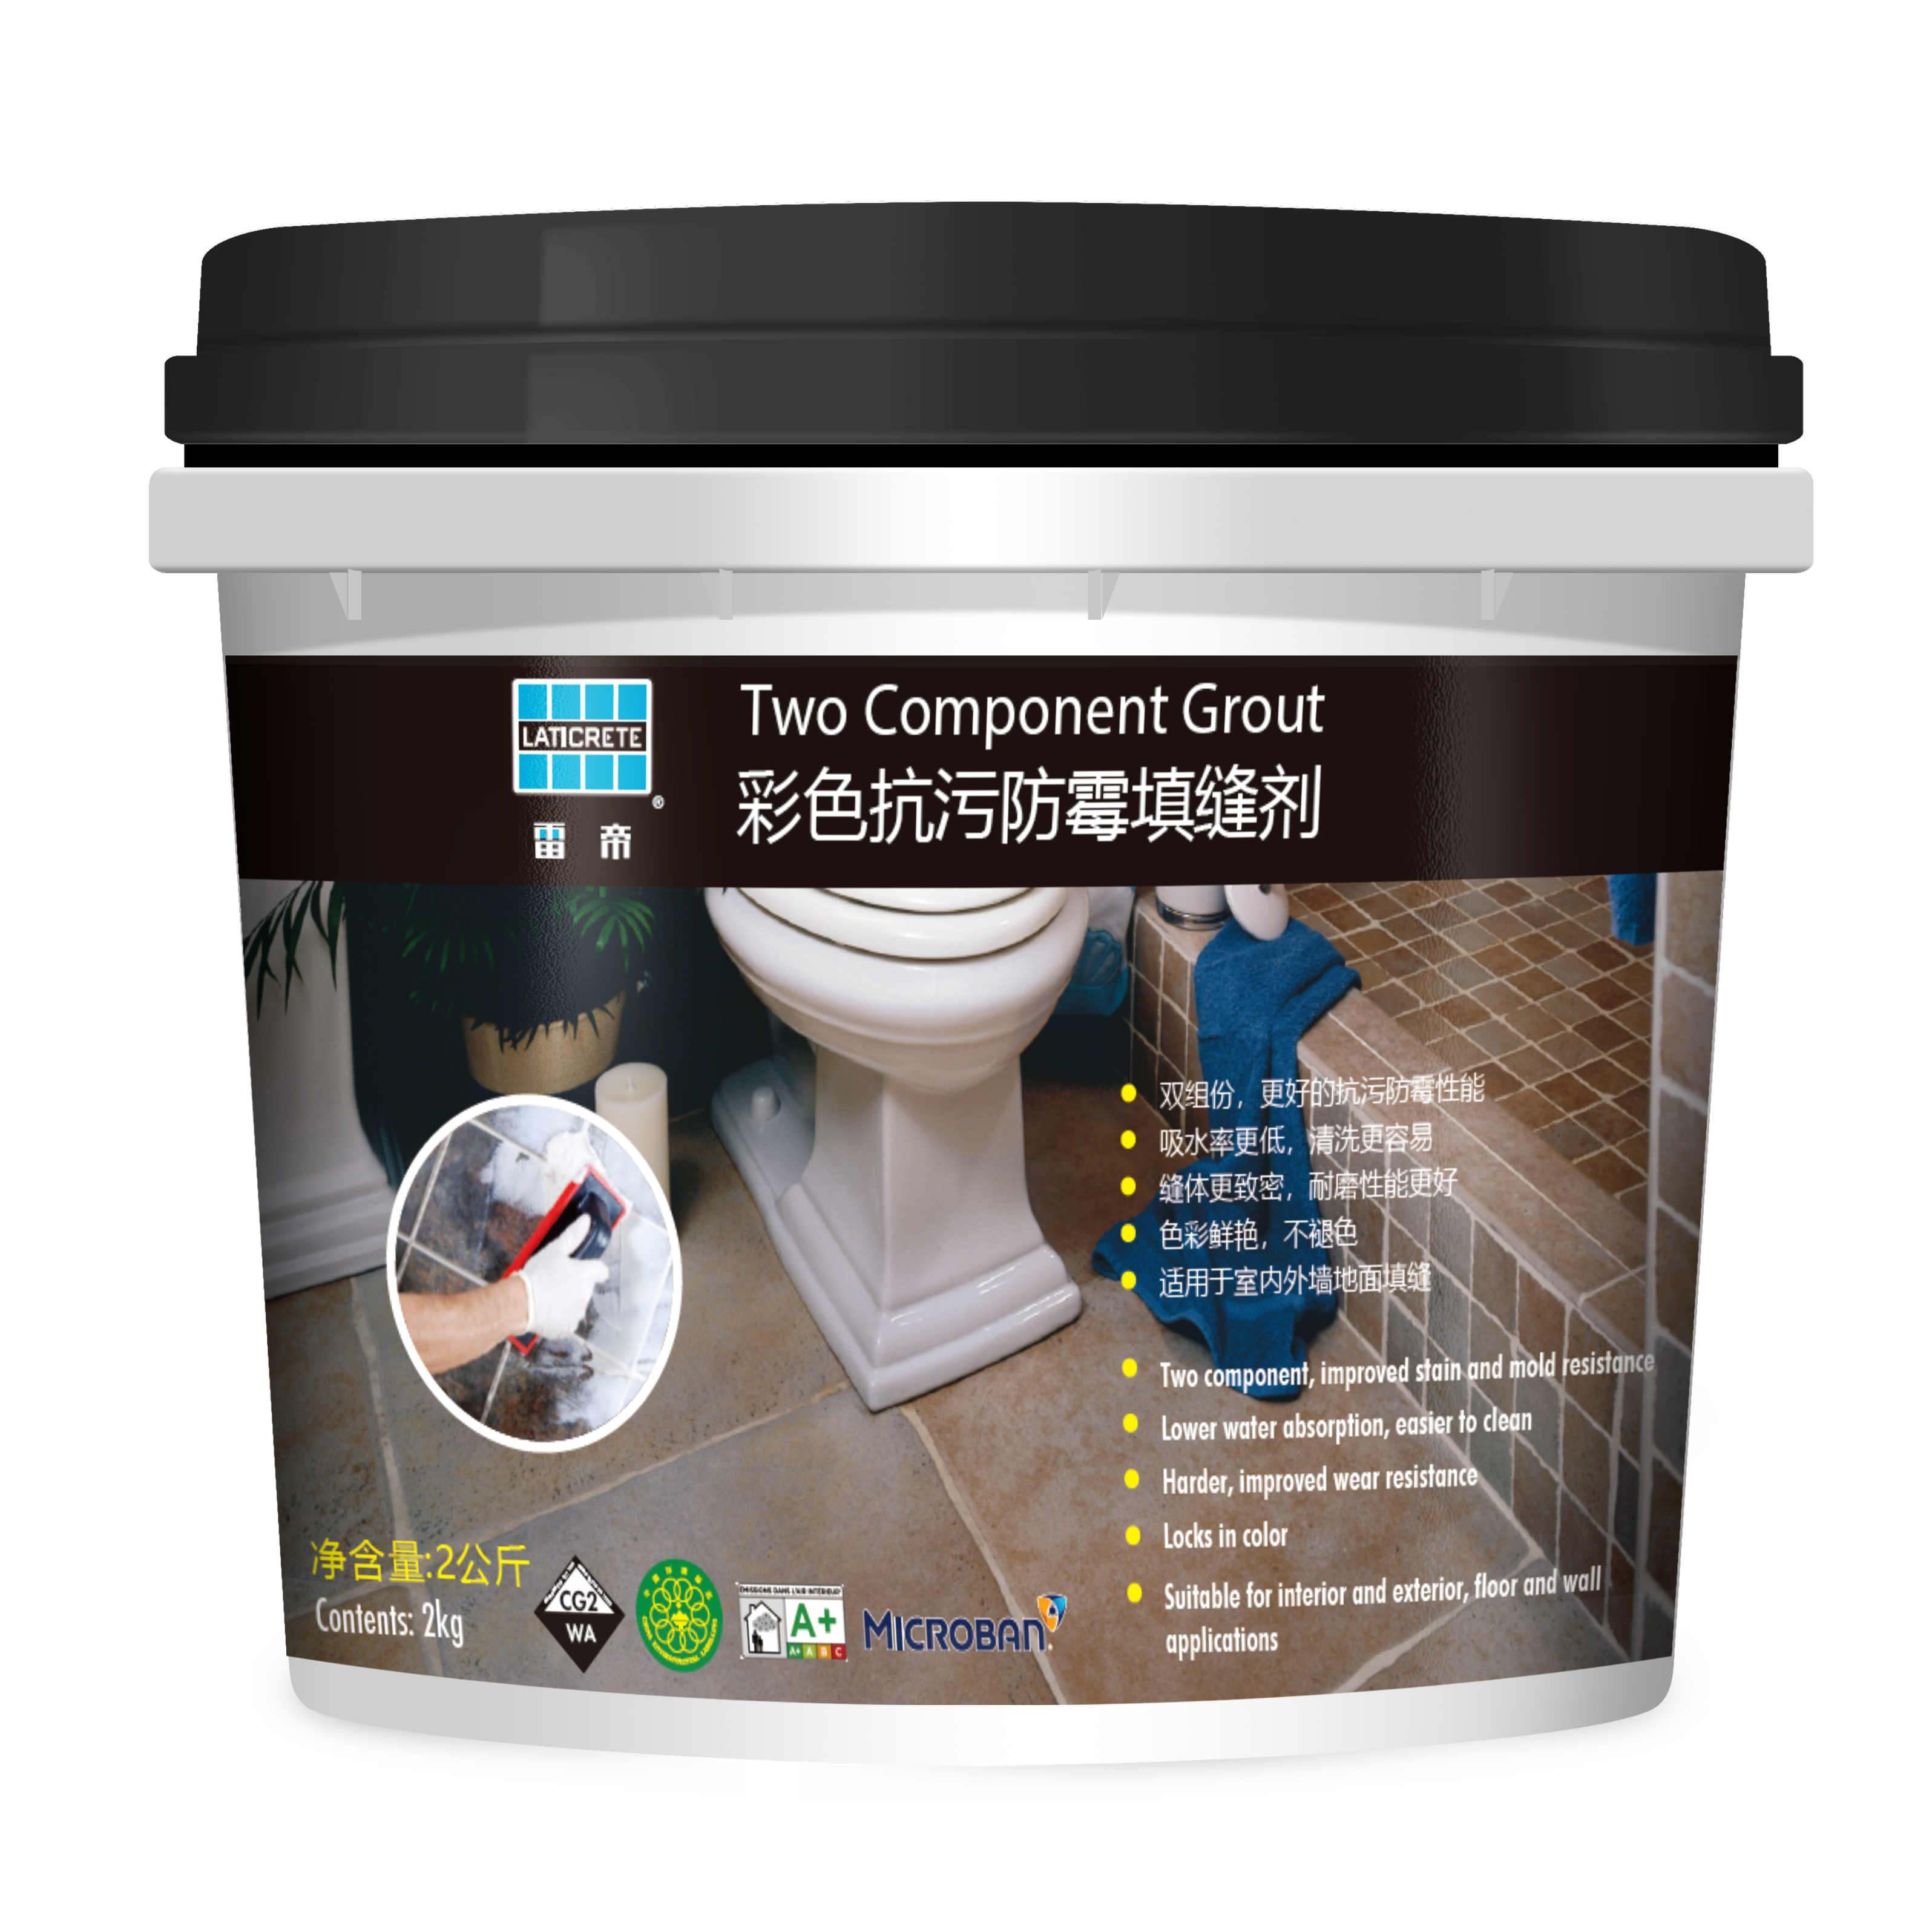 Two Component Grout